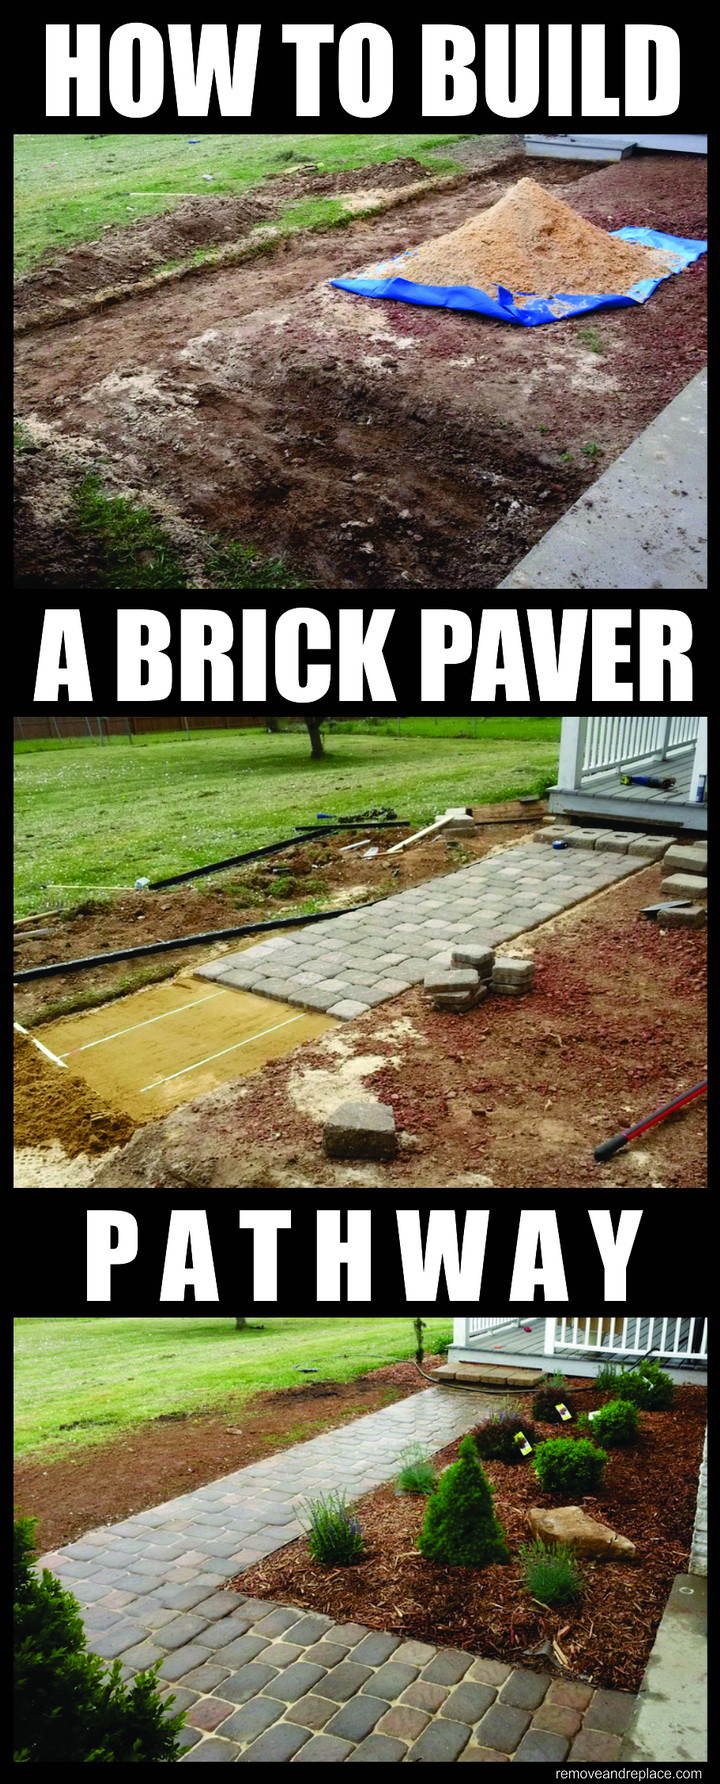 how to build a brick paver walkway pathway